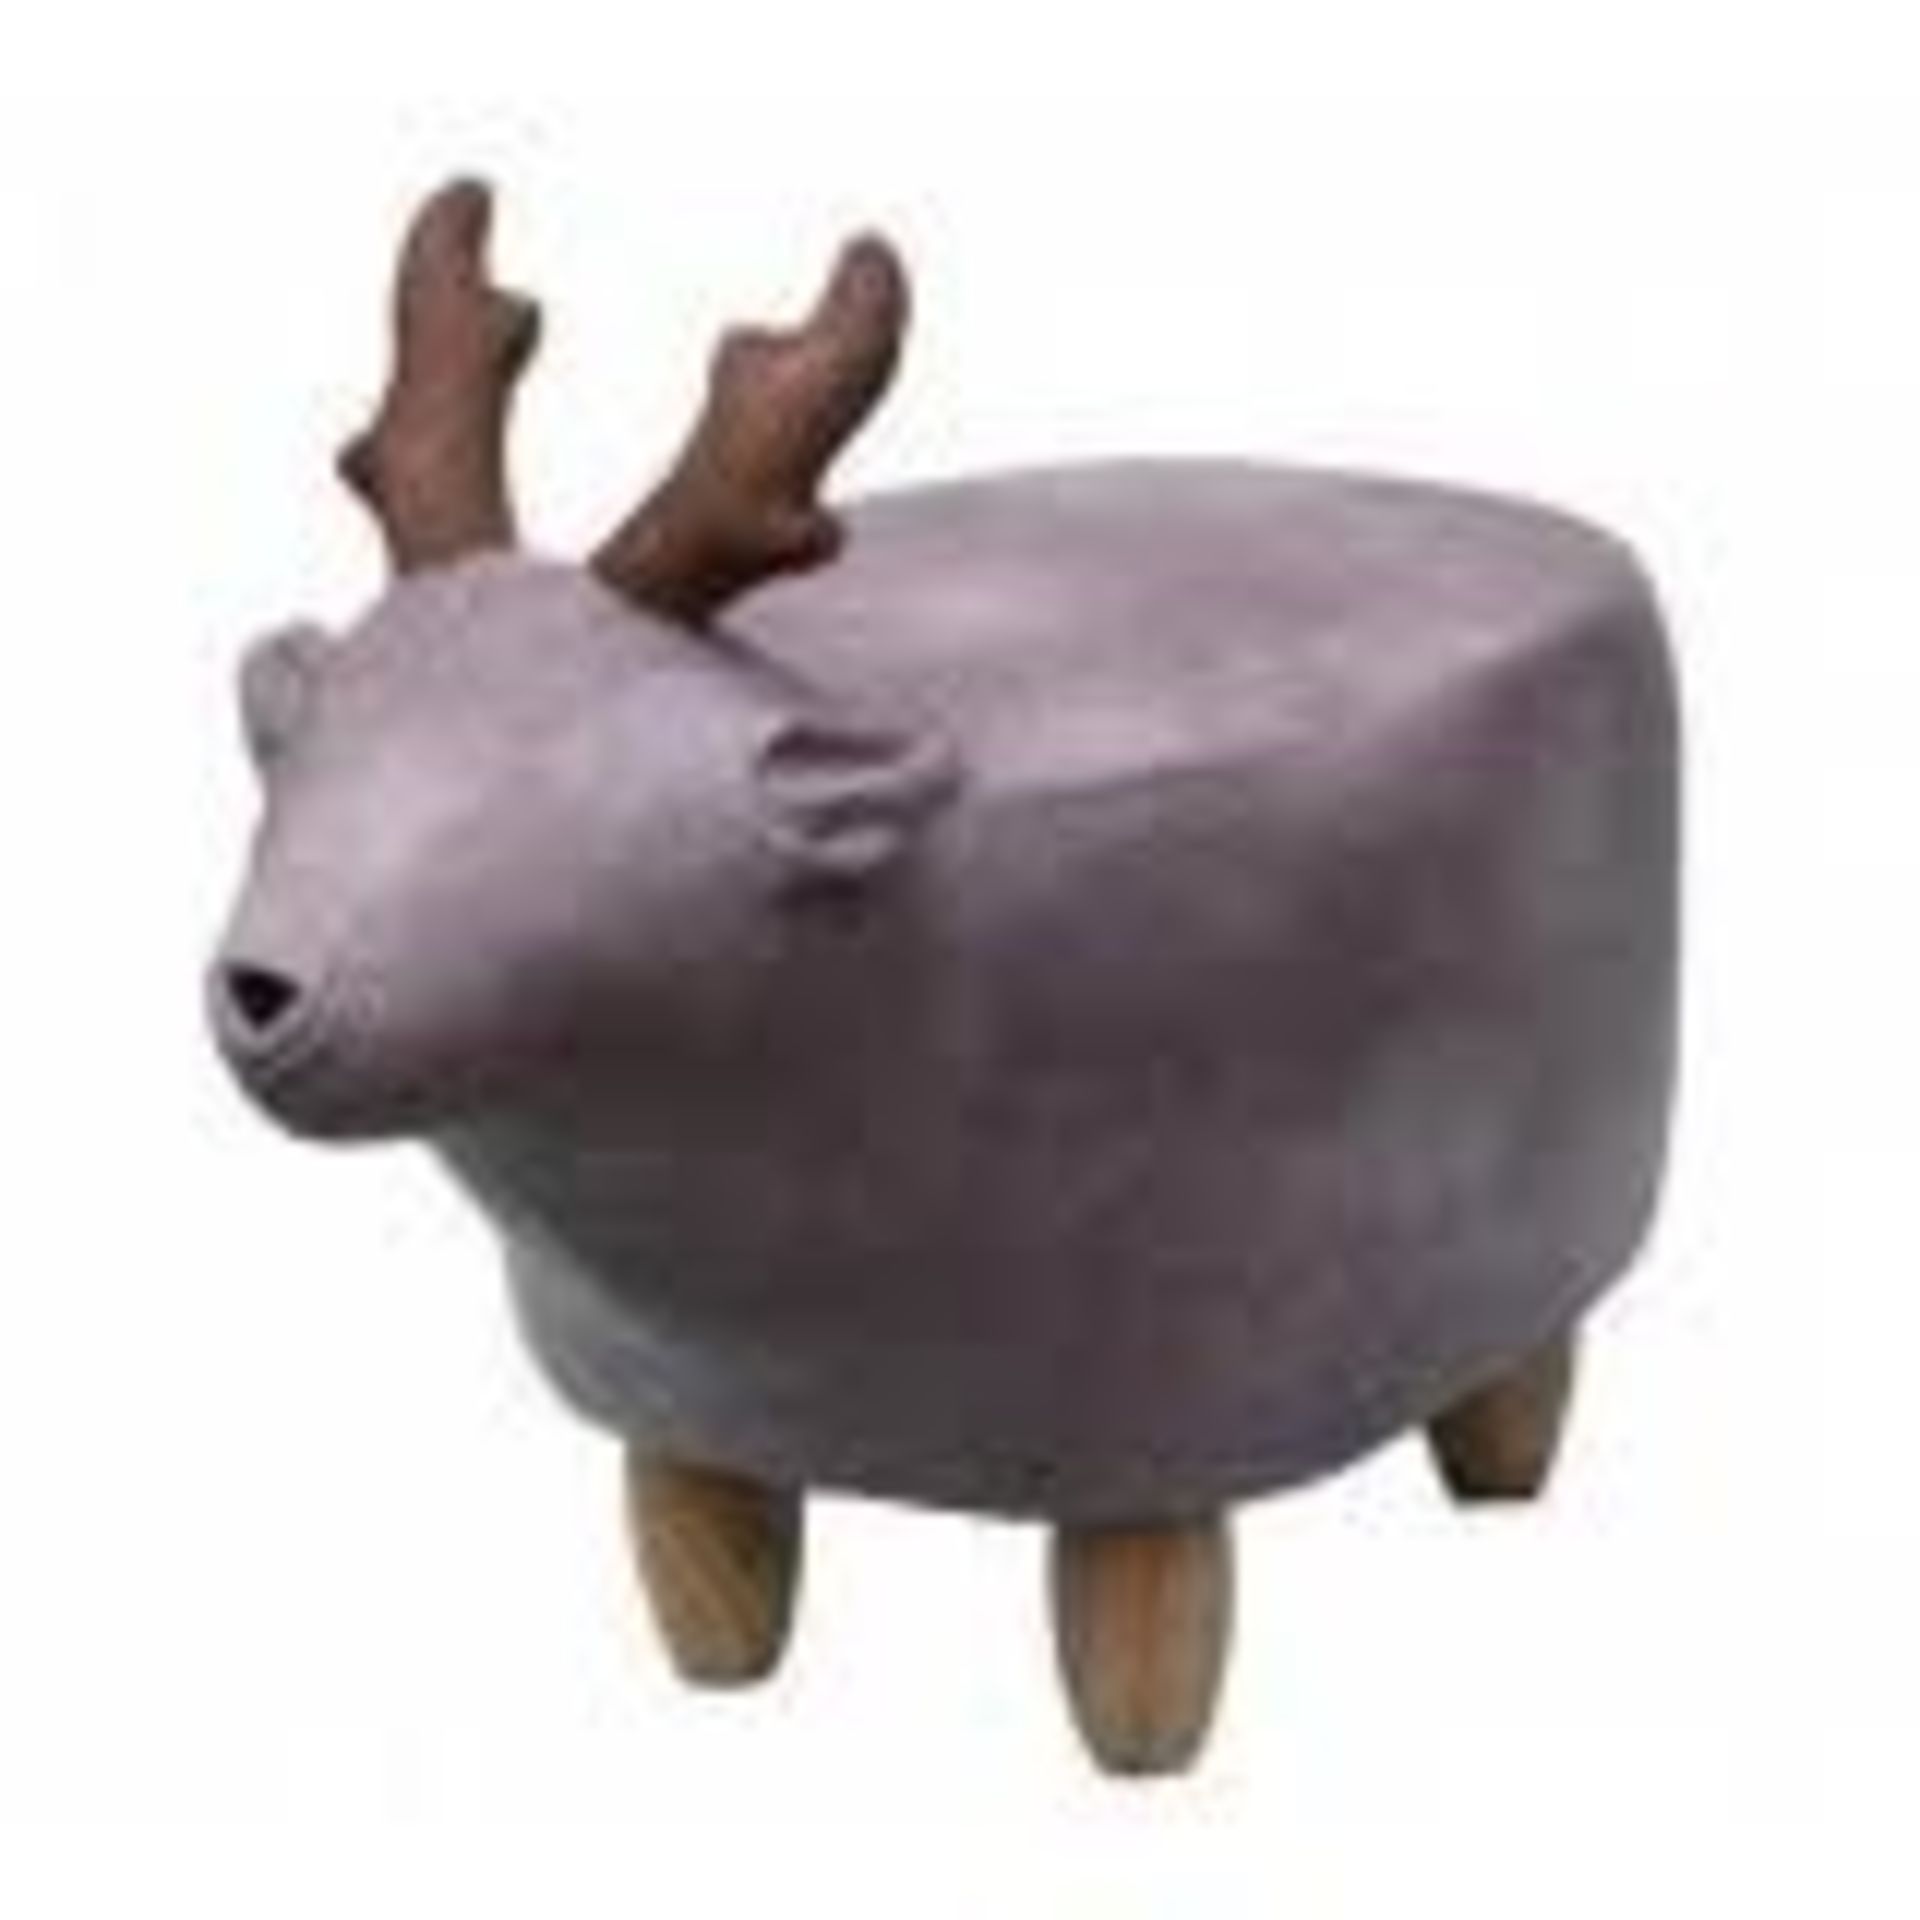 Boxed Rudi The Reindeer Stool RRP £70 (16904) (Public Viewings And Appraisals Available)